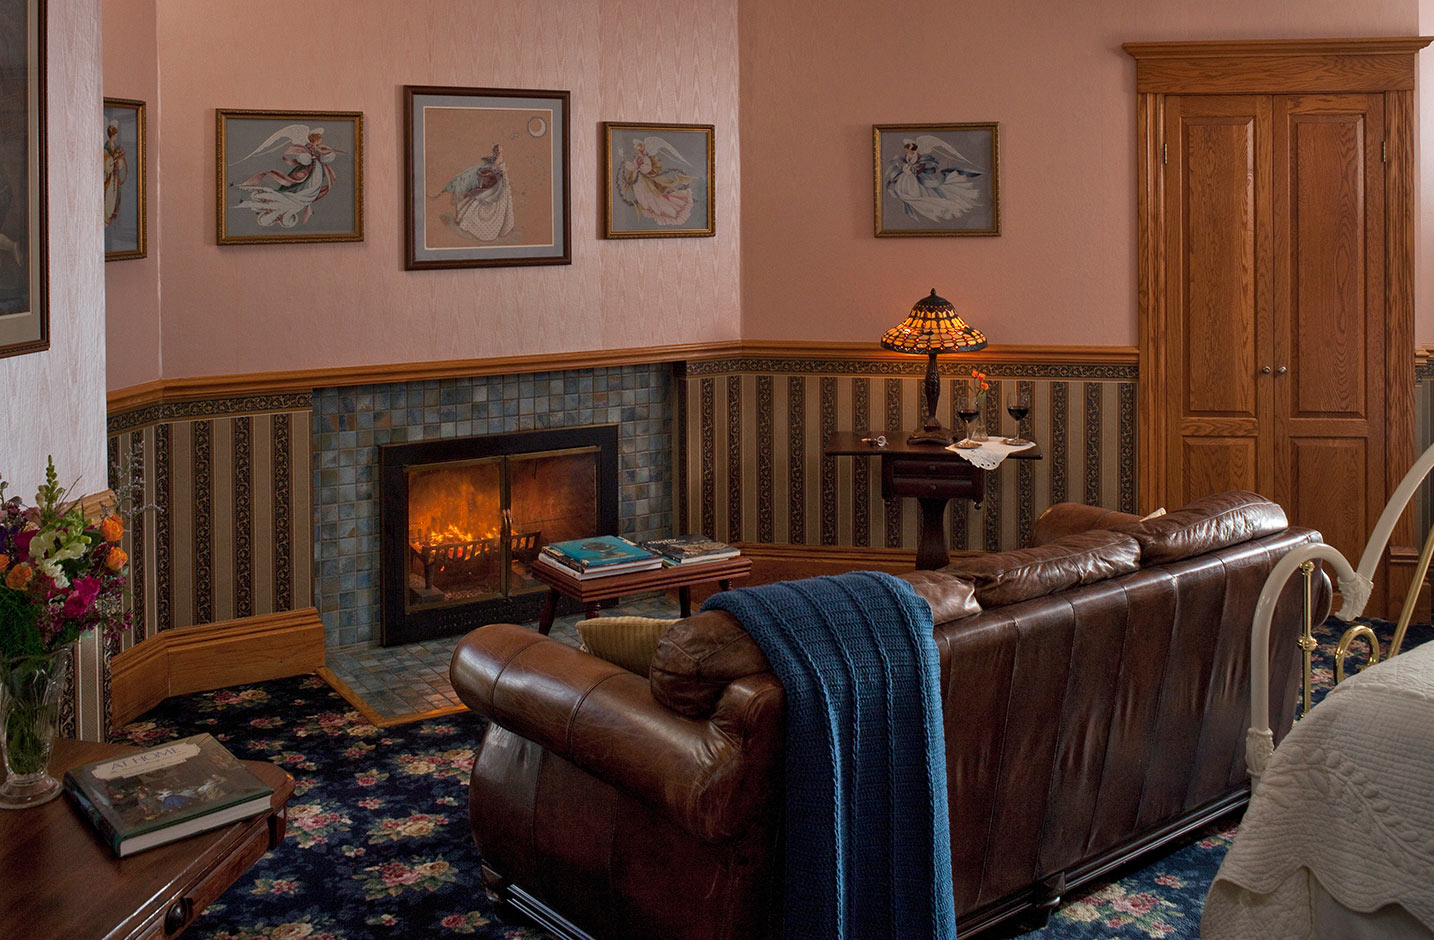 Decorative Fireplace and leather couch in Room VI